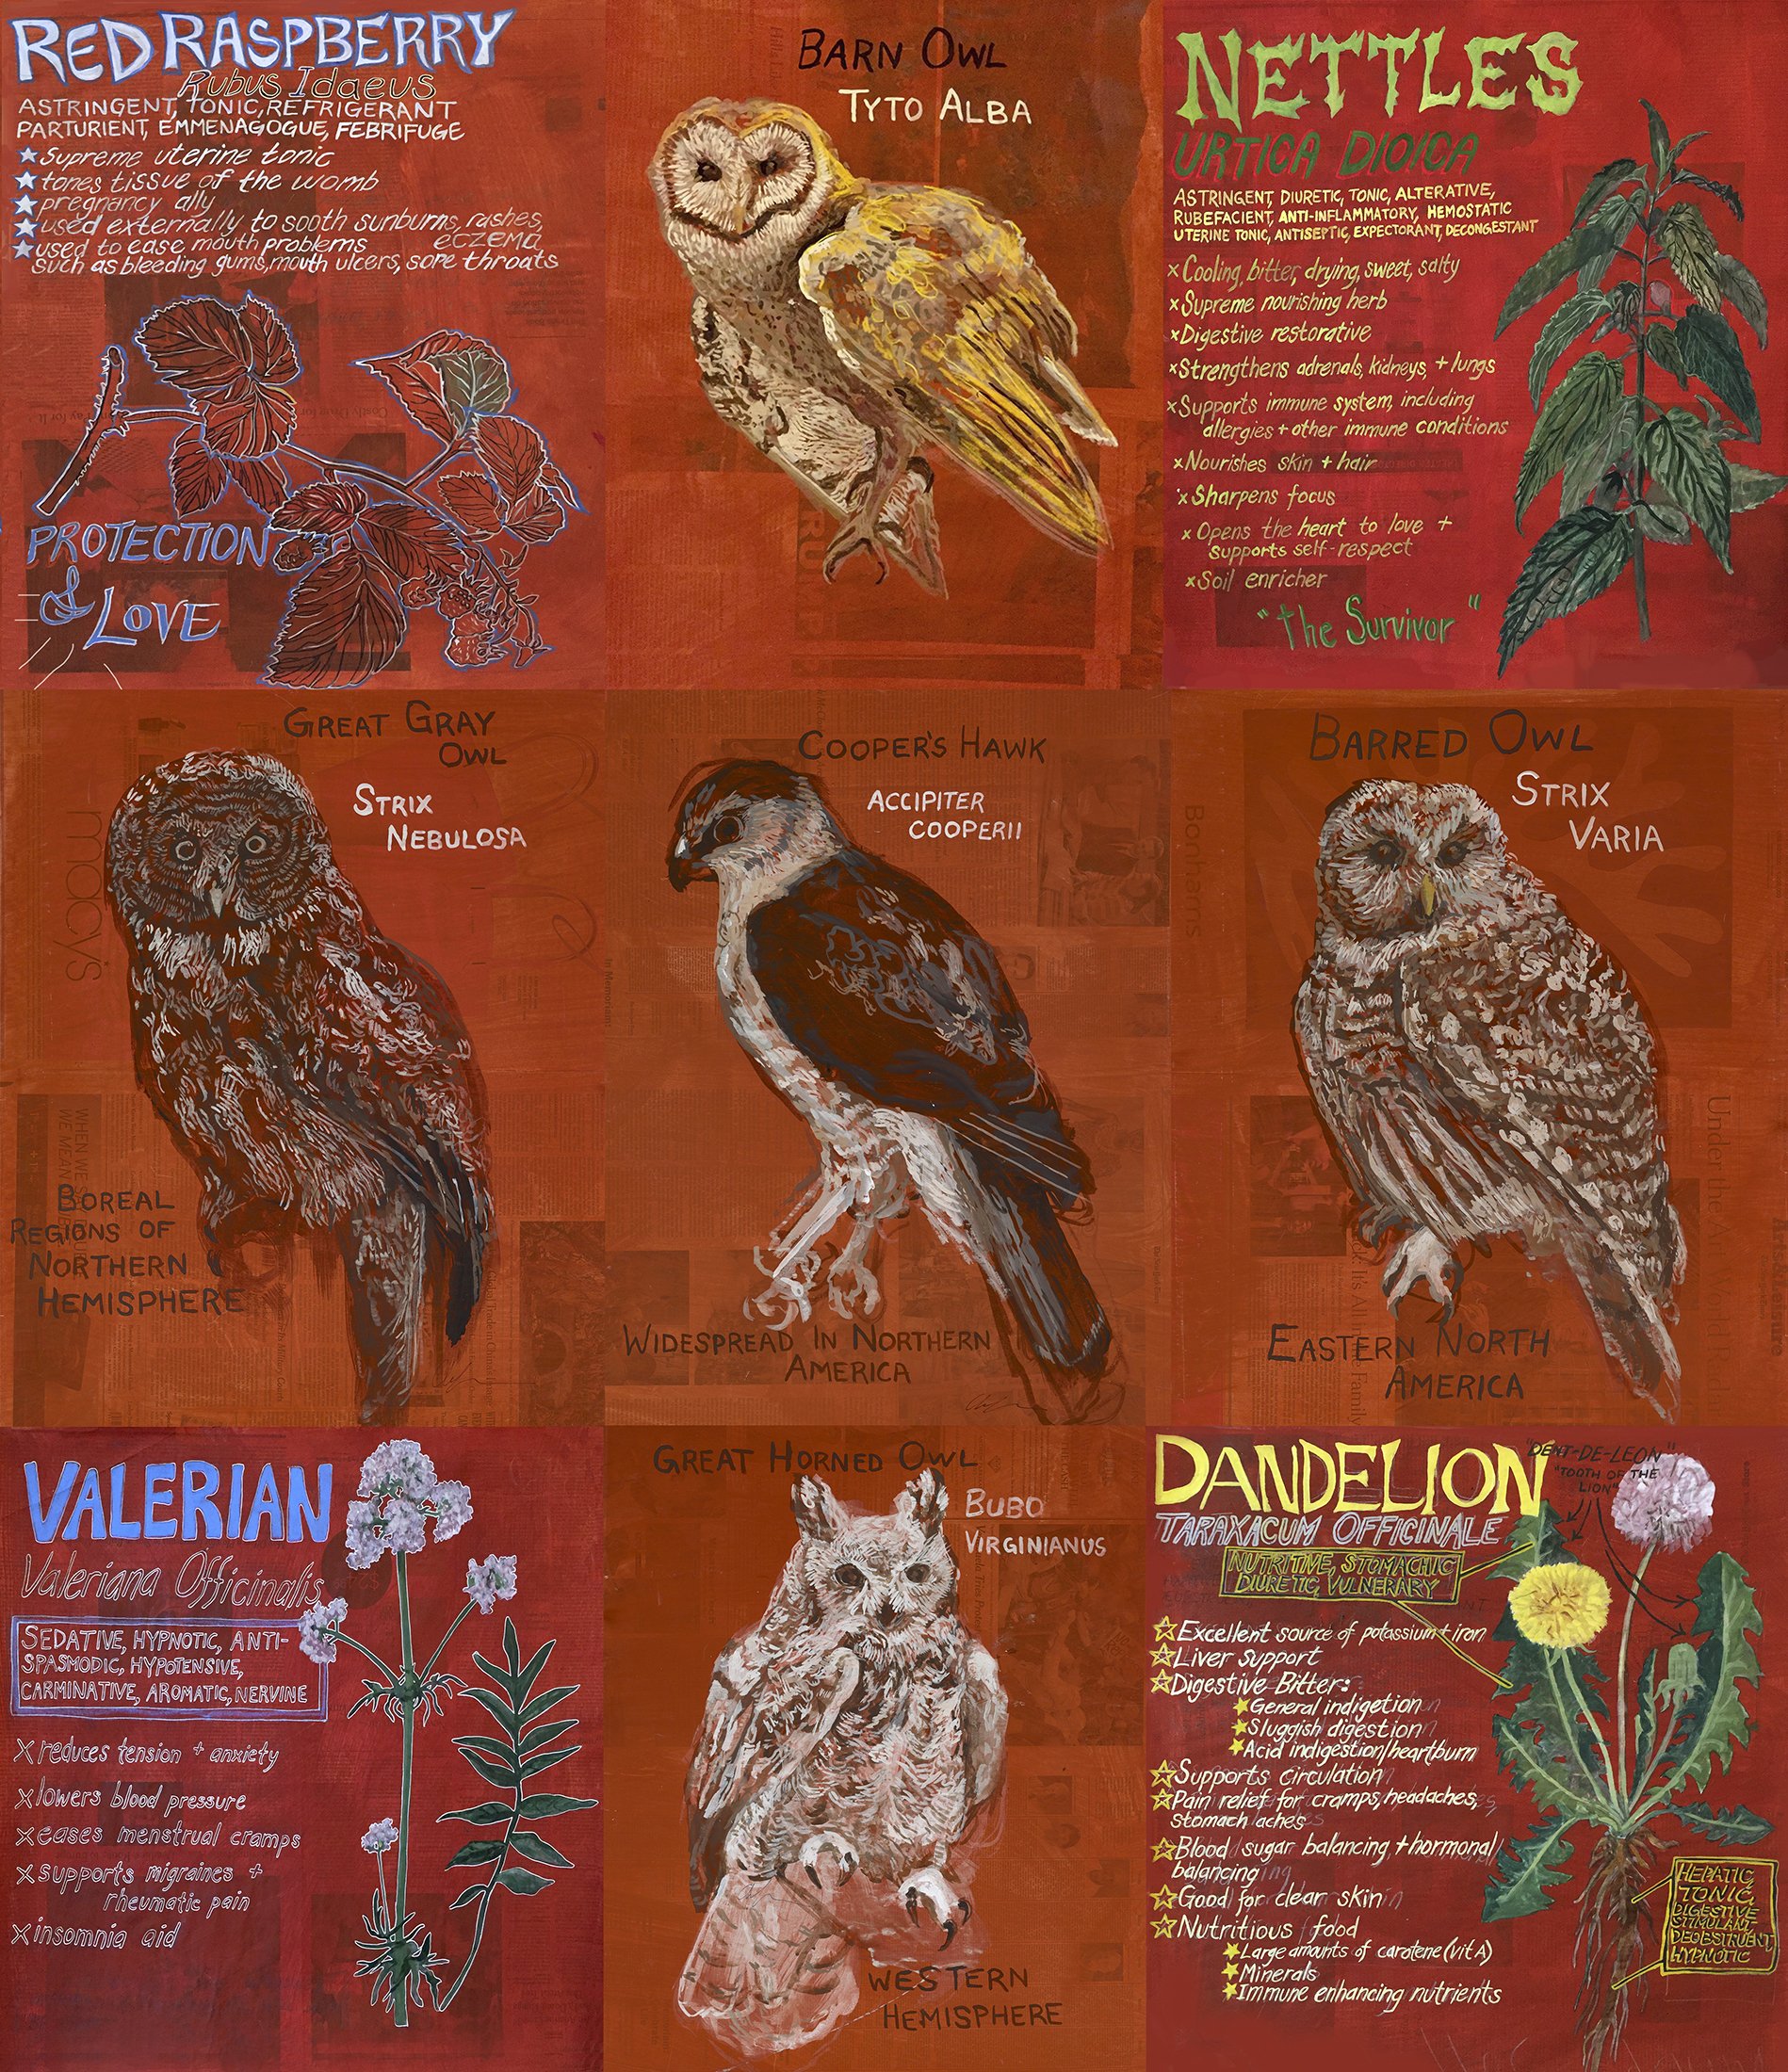  Eco-Art Edu Posters, 2017-2019  Approx. 18 in x 24 in  Red earth pigment, rabbit skin glue, and gouache on newspaper 